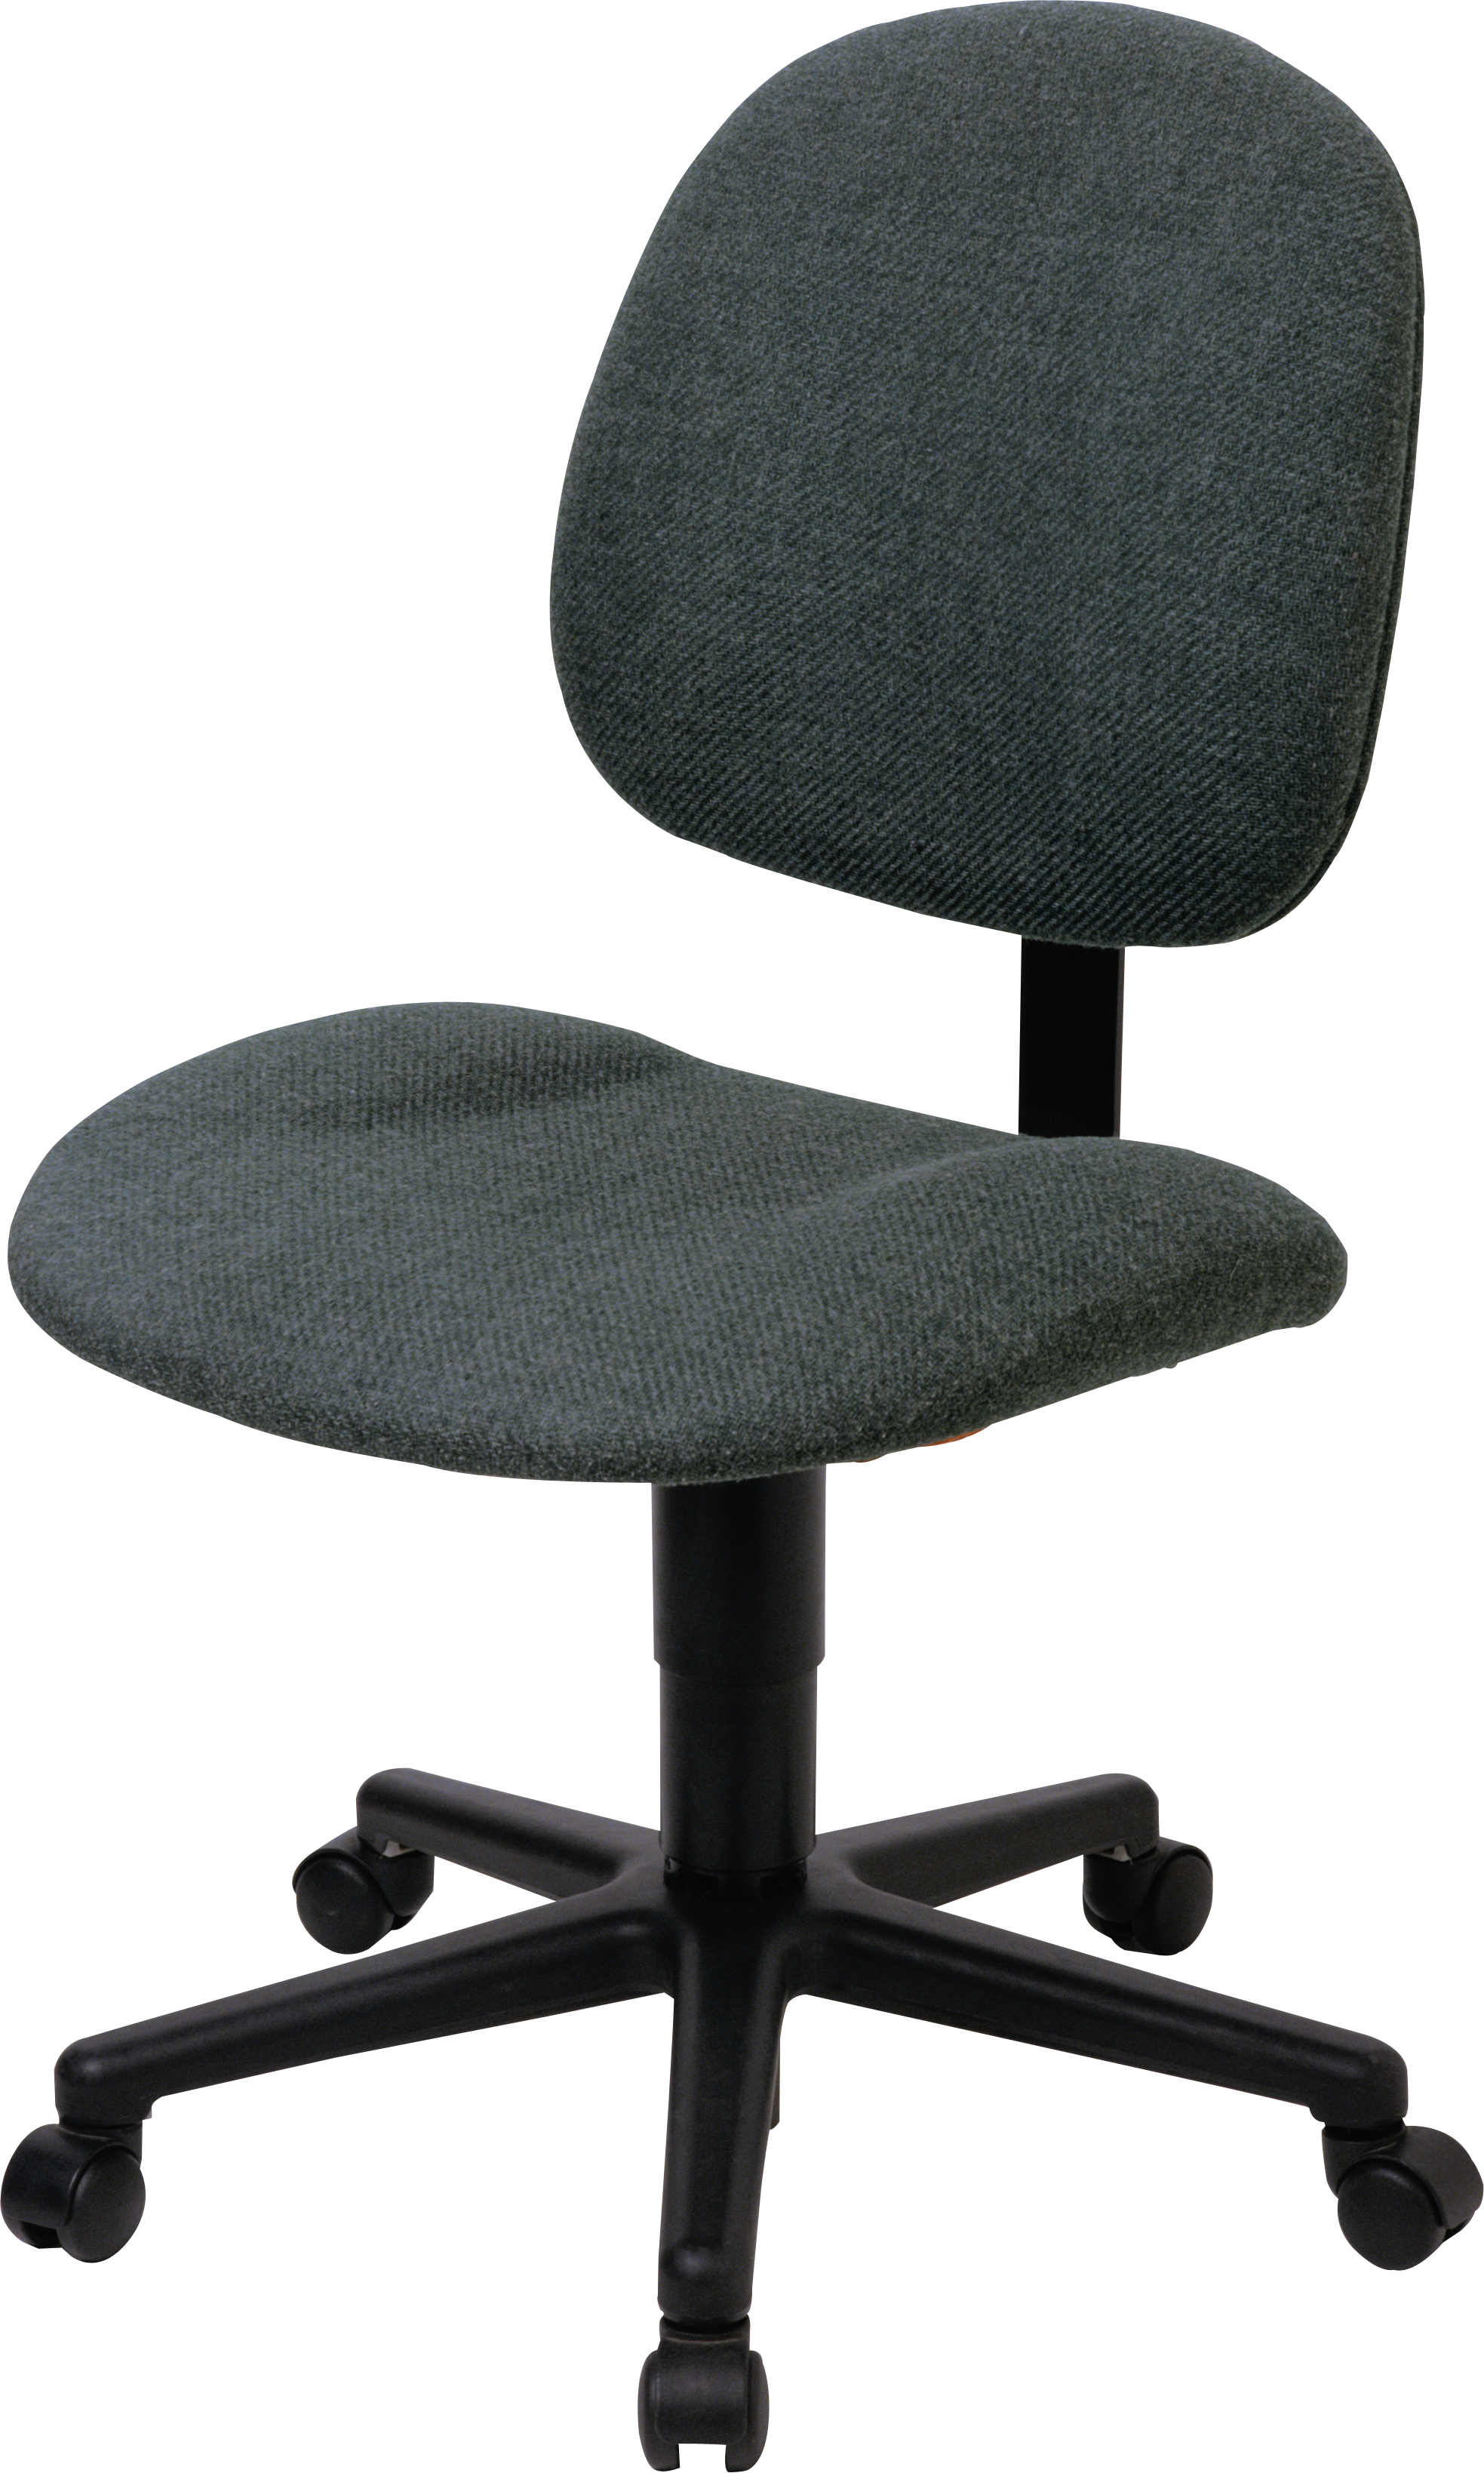 Free Office Chair Cliparts, Download Free Clip Art, Free